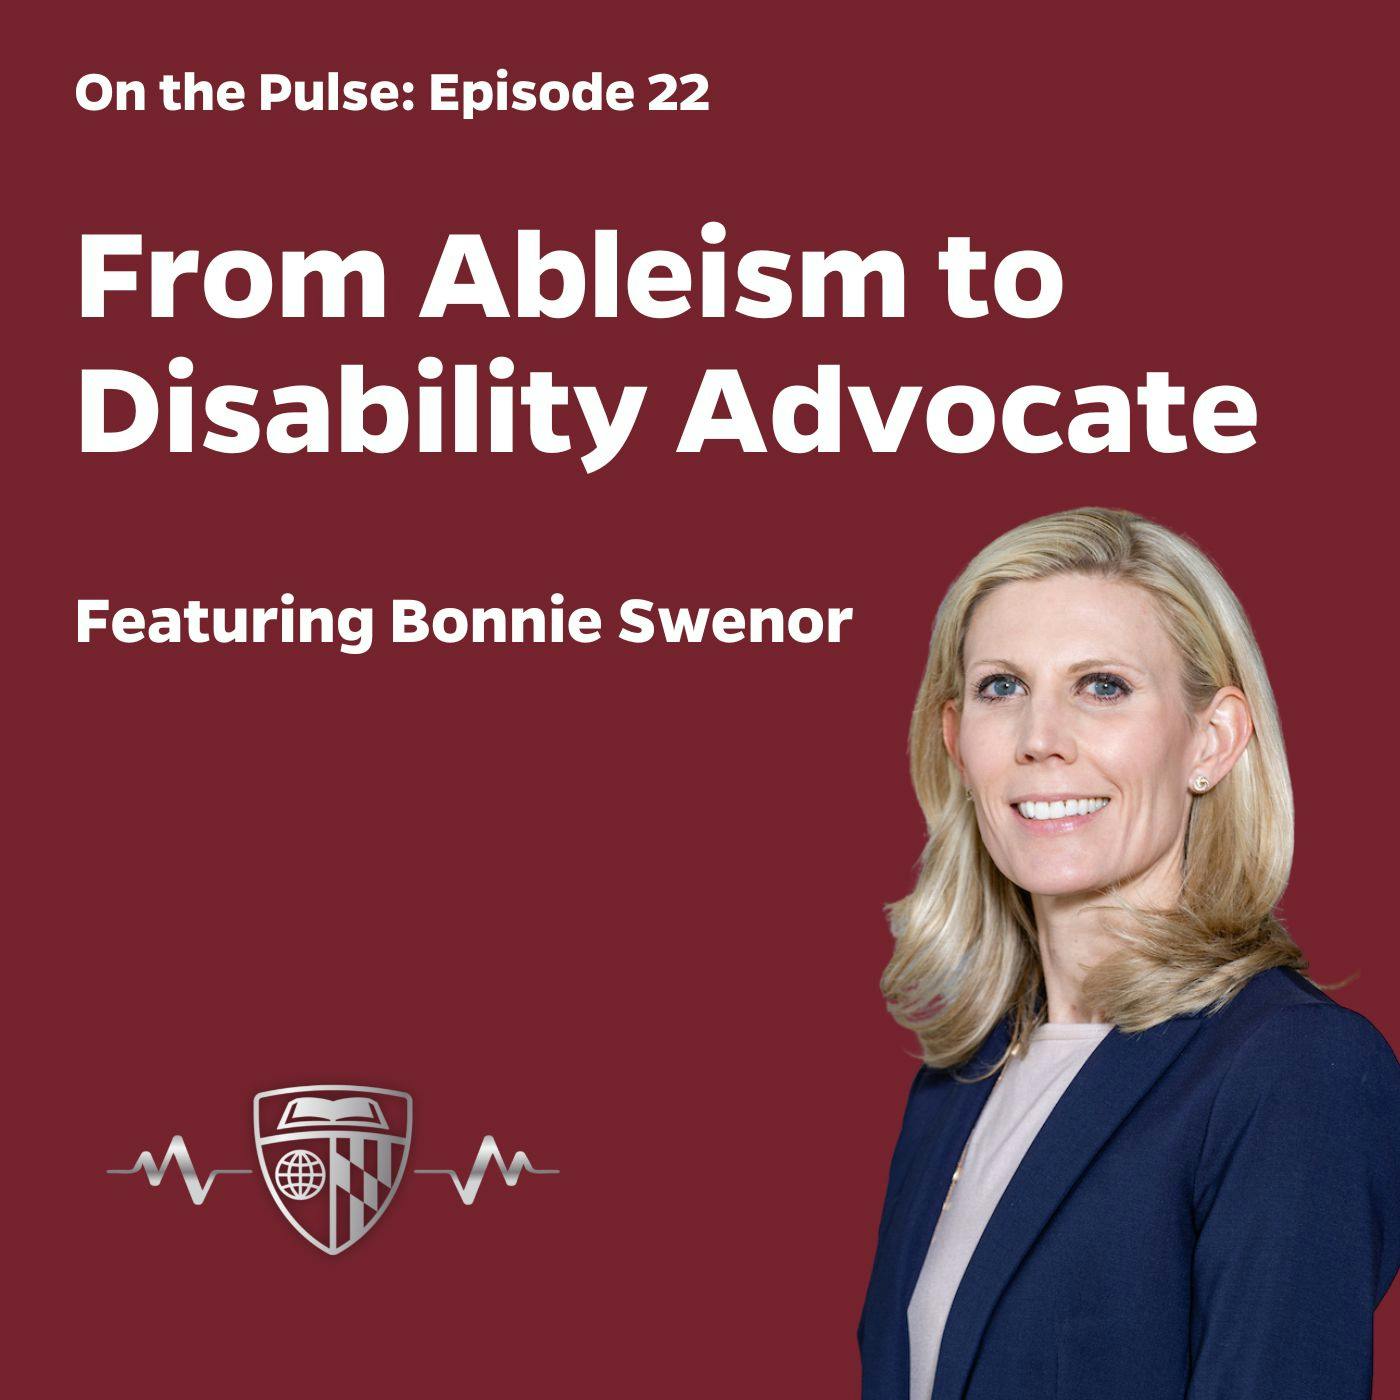 On The Pulse: From Ableism to Disability Advocate